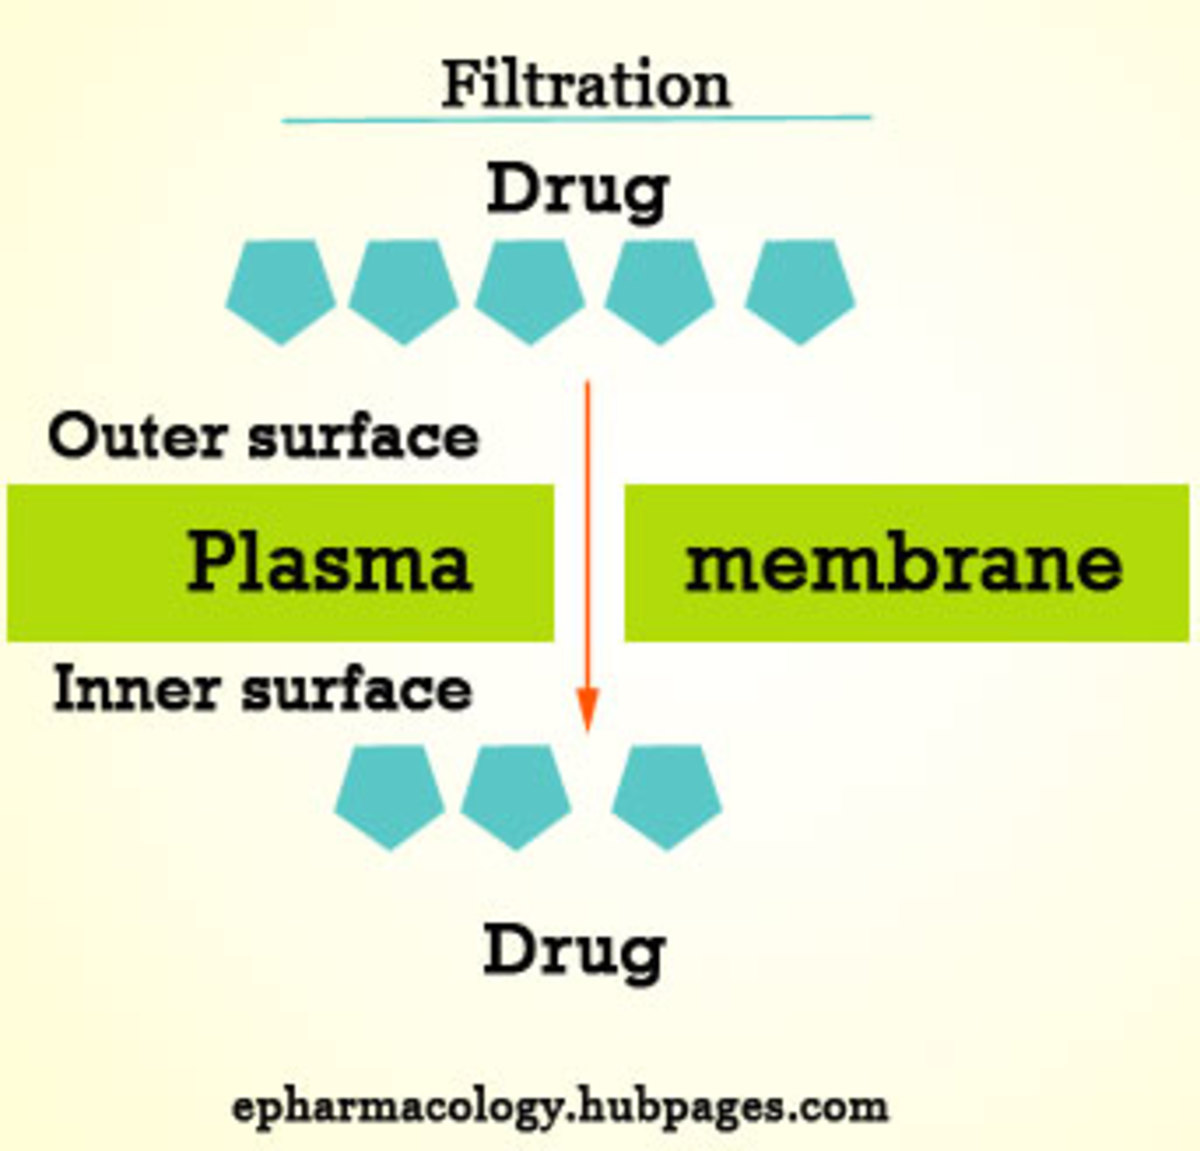 Filtration of drugs through pores in the plasma membrane!